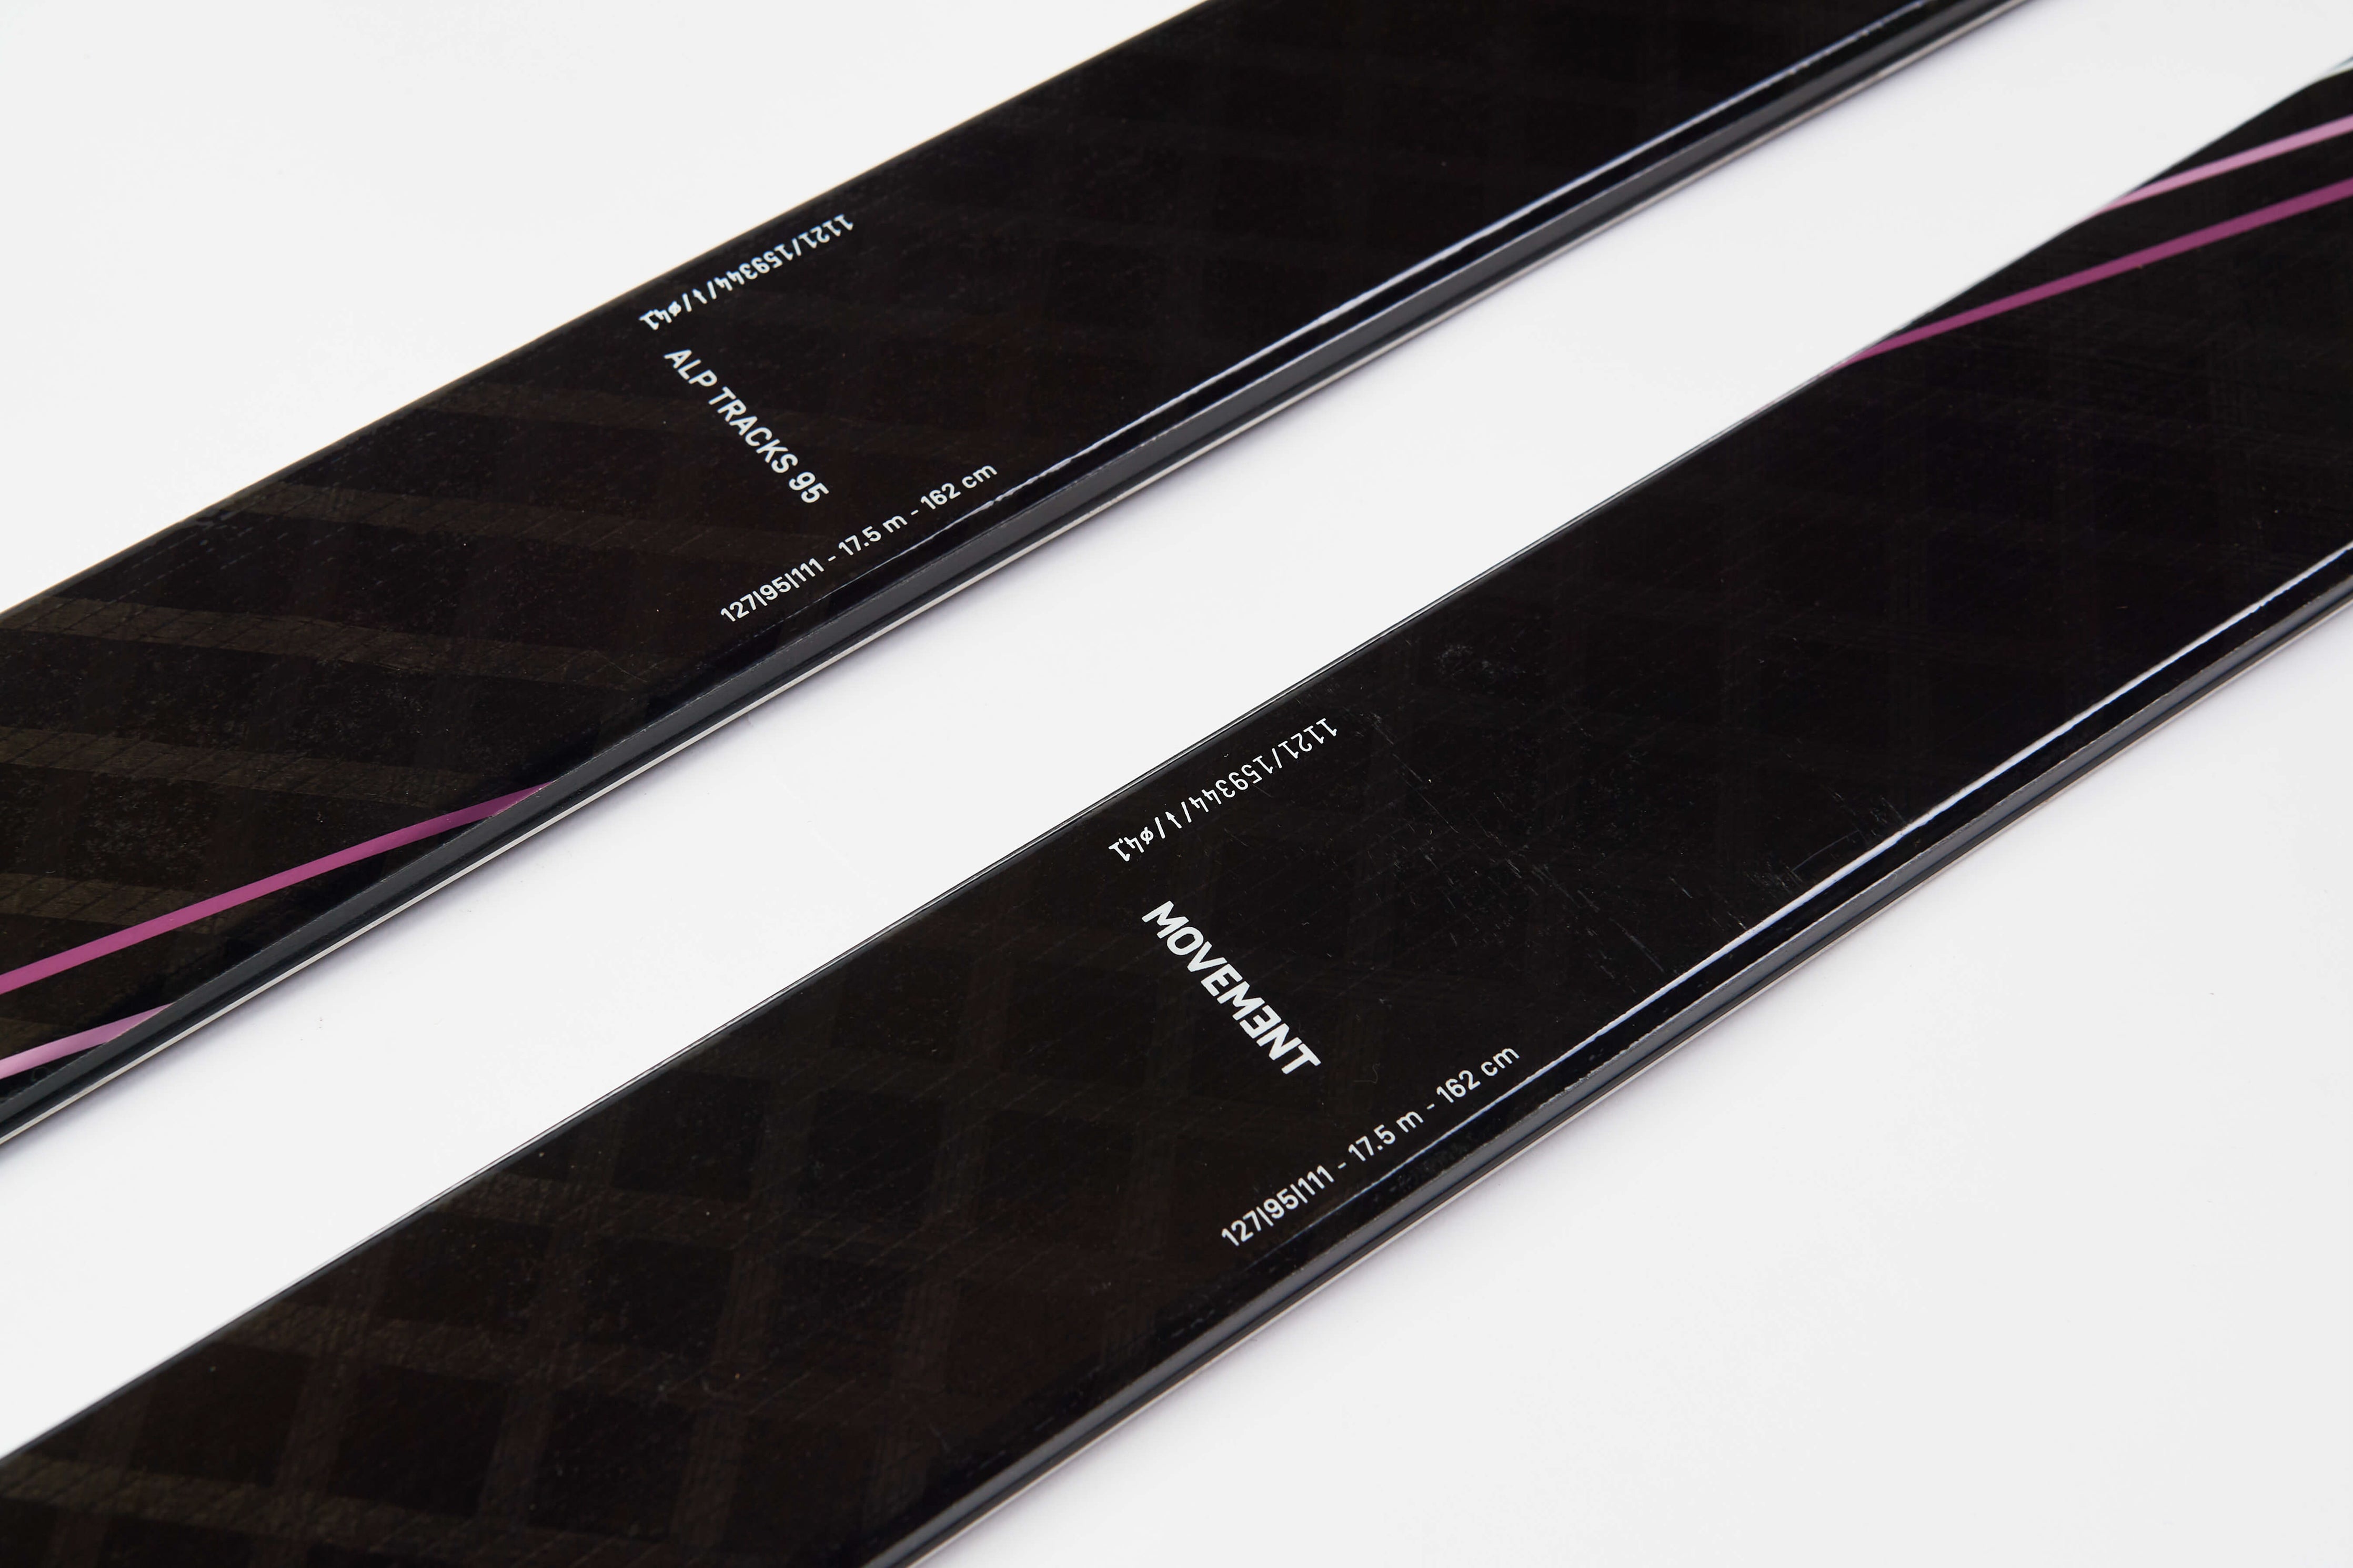 Explore new horizons with Movement's Alp Tracks 95 Women's touring skis by my side.